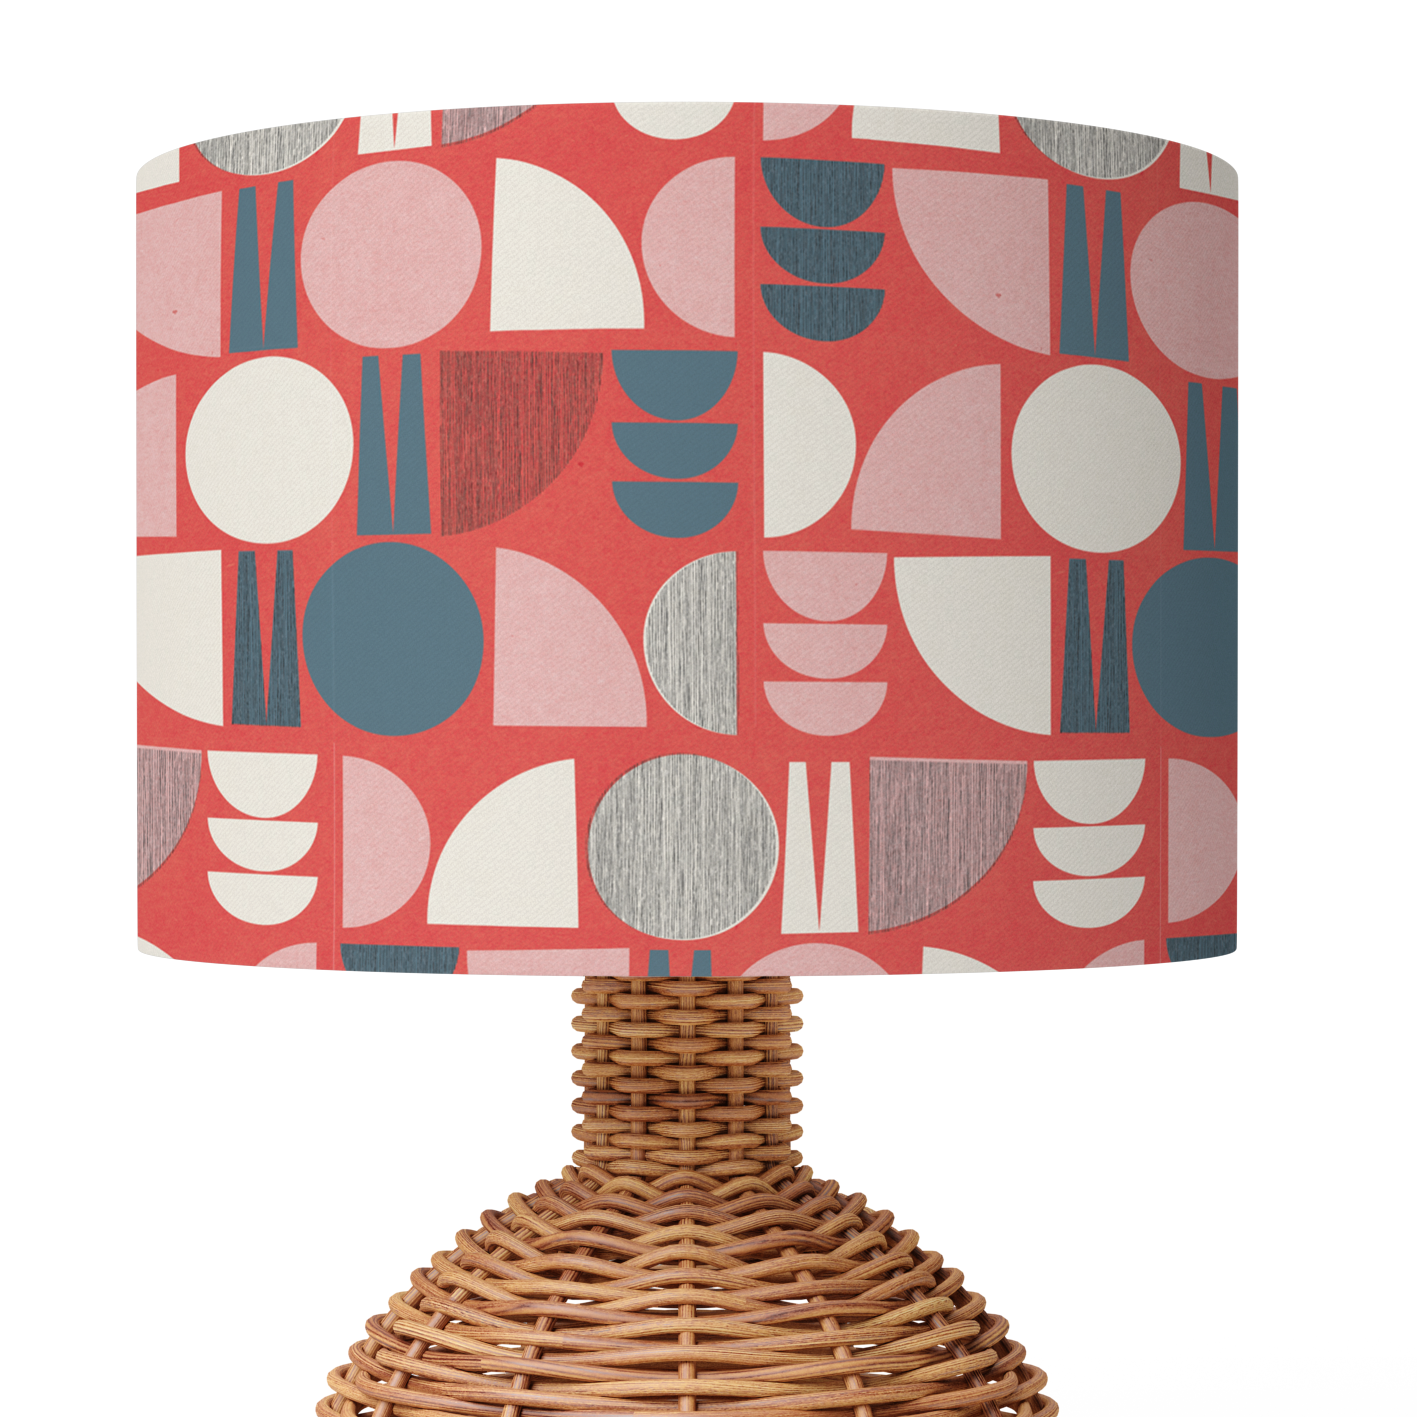 Shape Lampshade - Red (Ceiling/Pendant or Table)